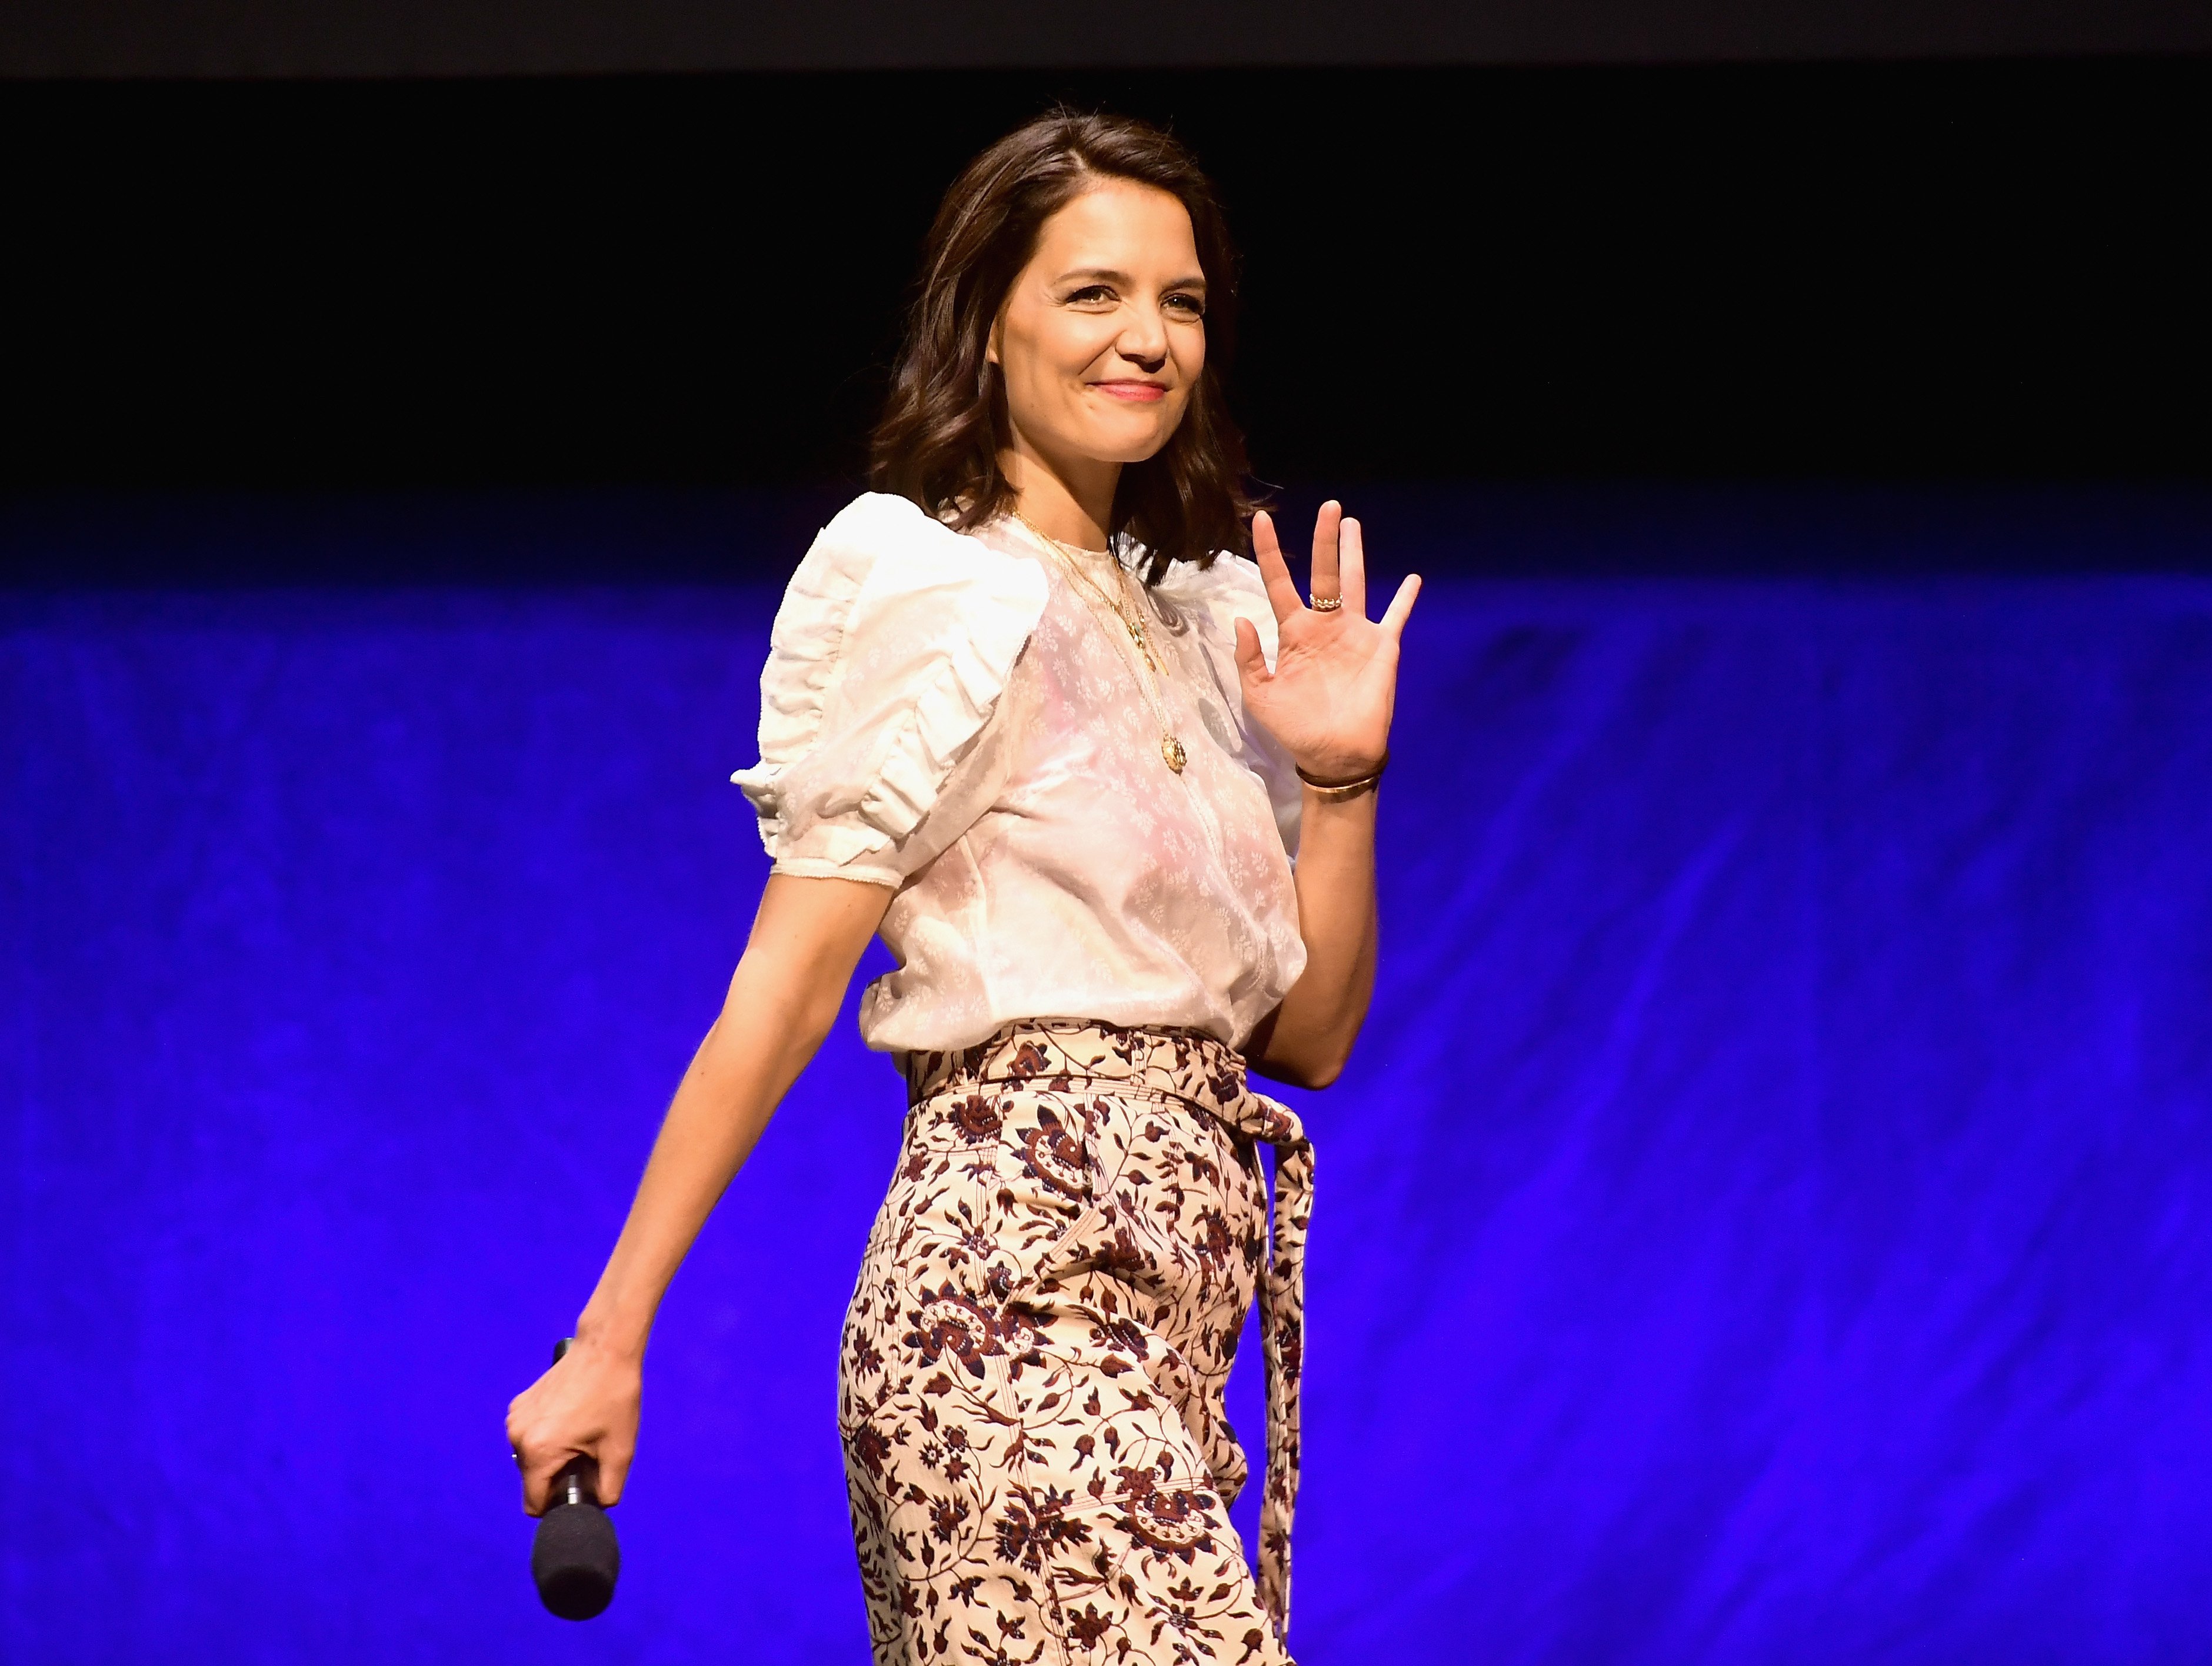 Katie Holmes speaks onstage at CinemaCon 2019 | Photo: Getty Images